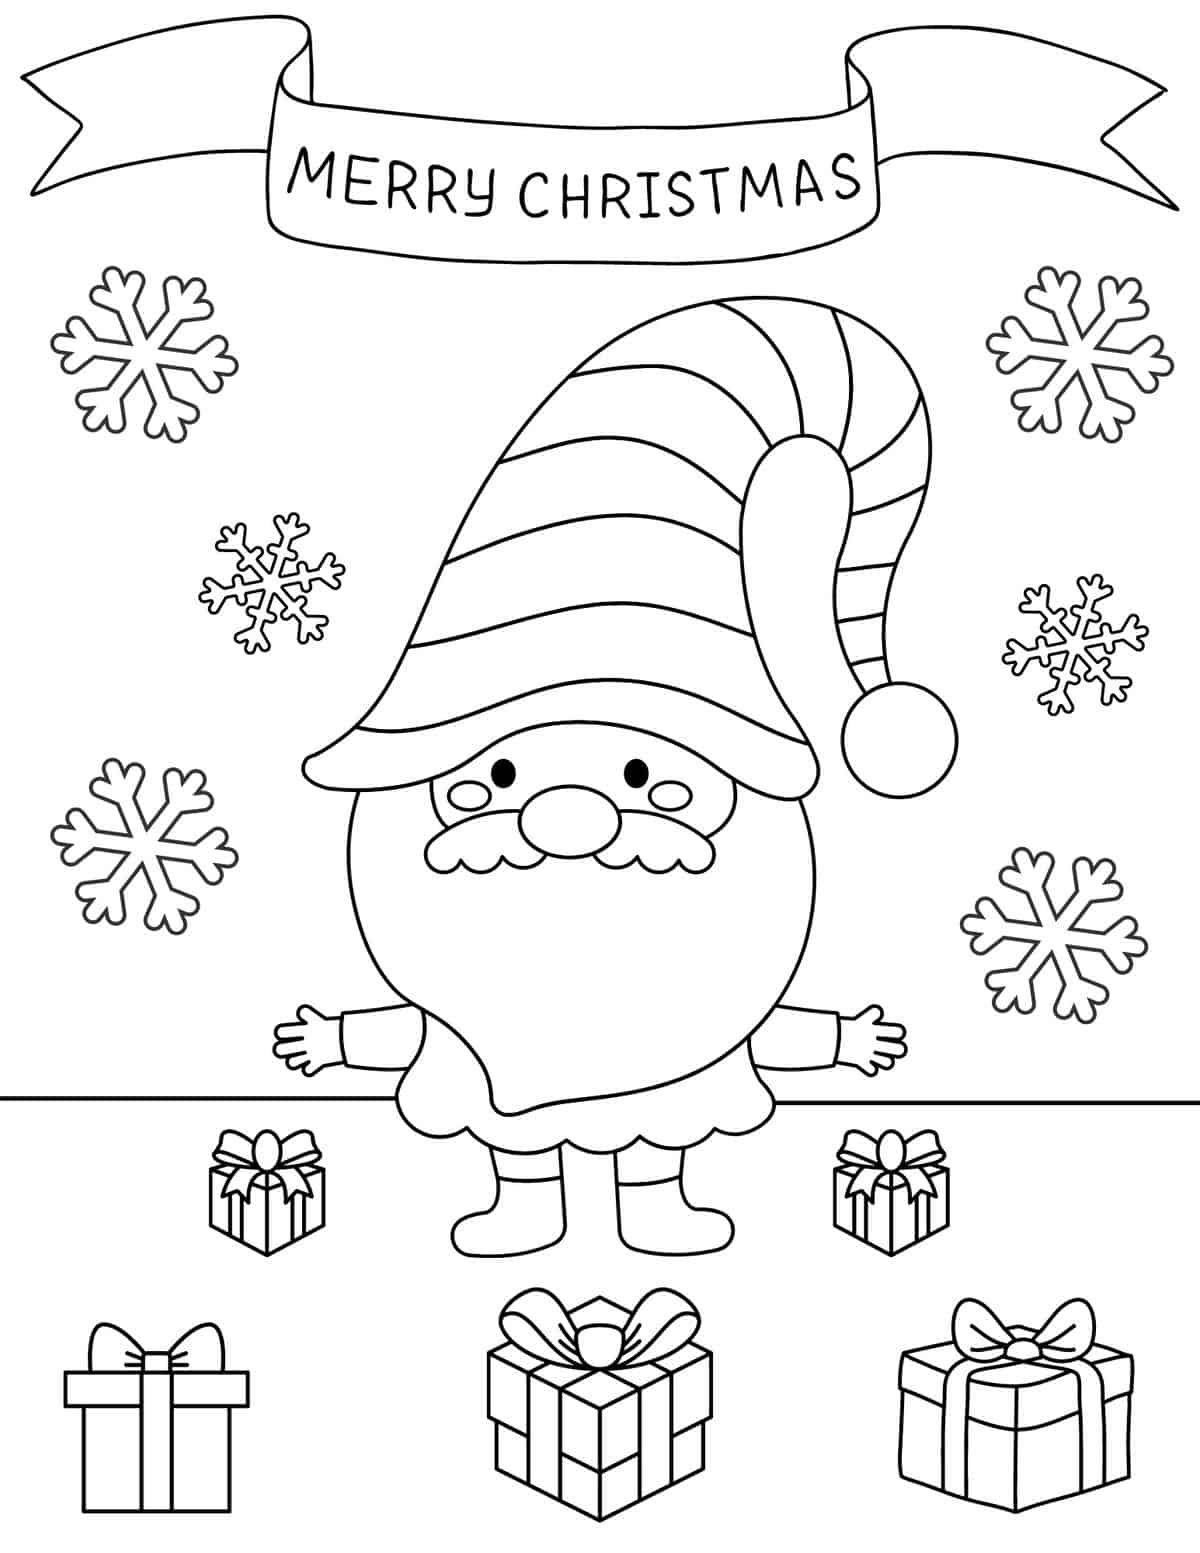 Downloadable Christmas colouring pages - The Organised Housewife